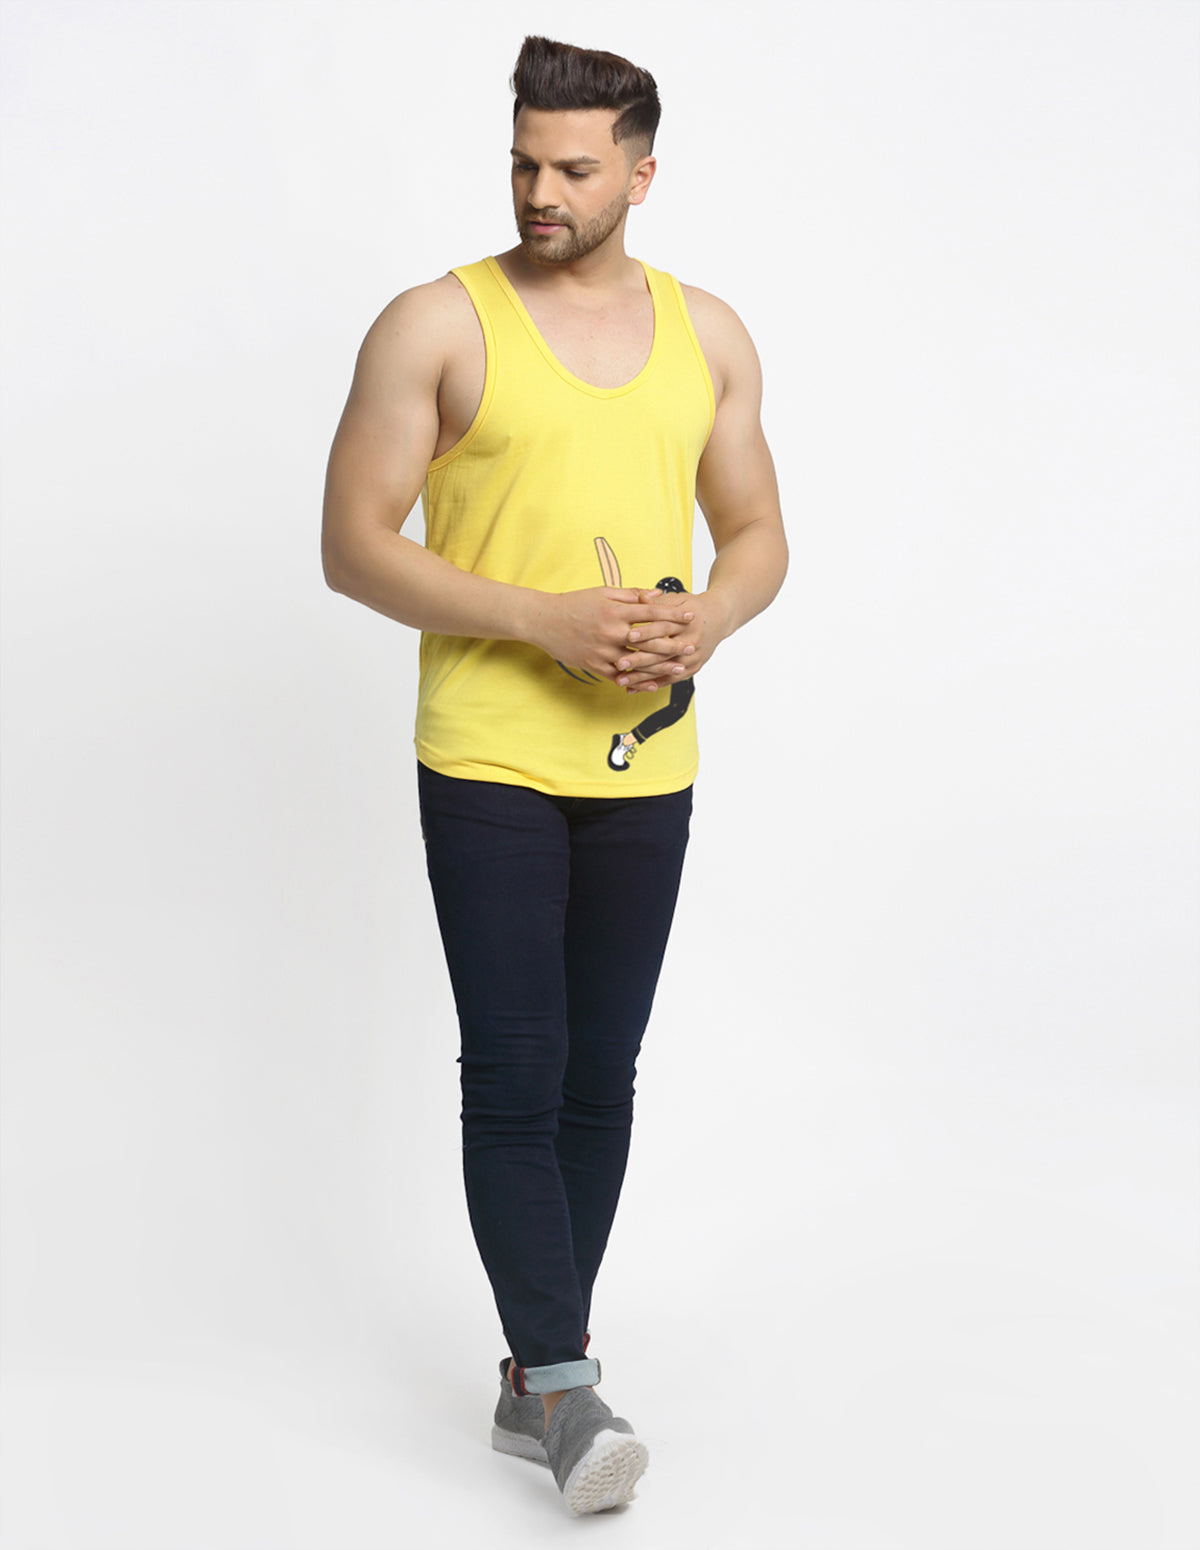 Men's Pack of 2 Turquiose & Yellow Printed Gym Vest - Friskers